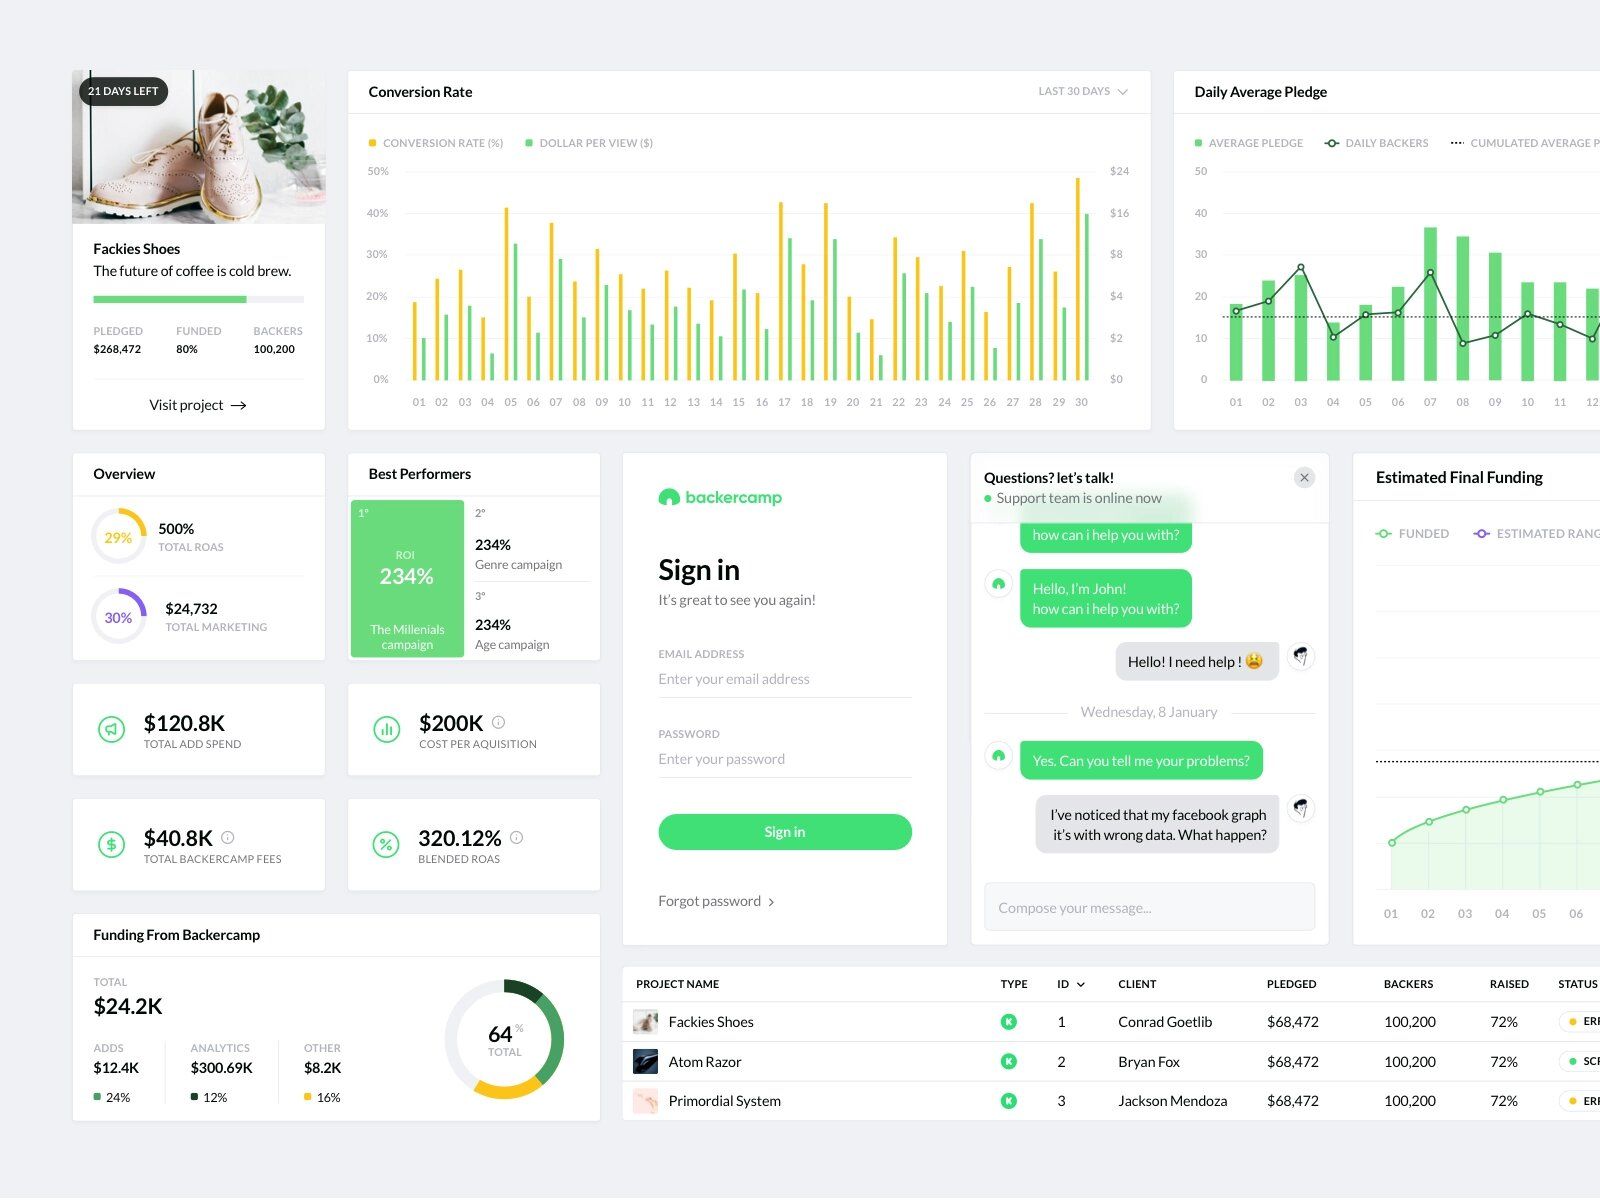 You might need an admin panel for your crowdfunding site so you could control your business from the inside (track funding transfers for AML control, for example) (*image by [Mário Rodrigues](https://dribbble.com/mariorodrigues){ rel="nofollow" target="_blank" .default-md}*)